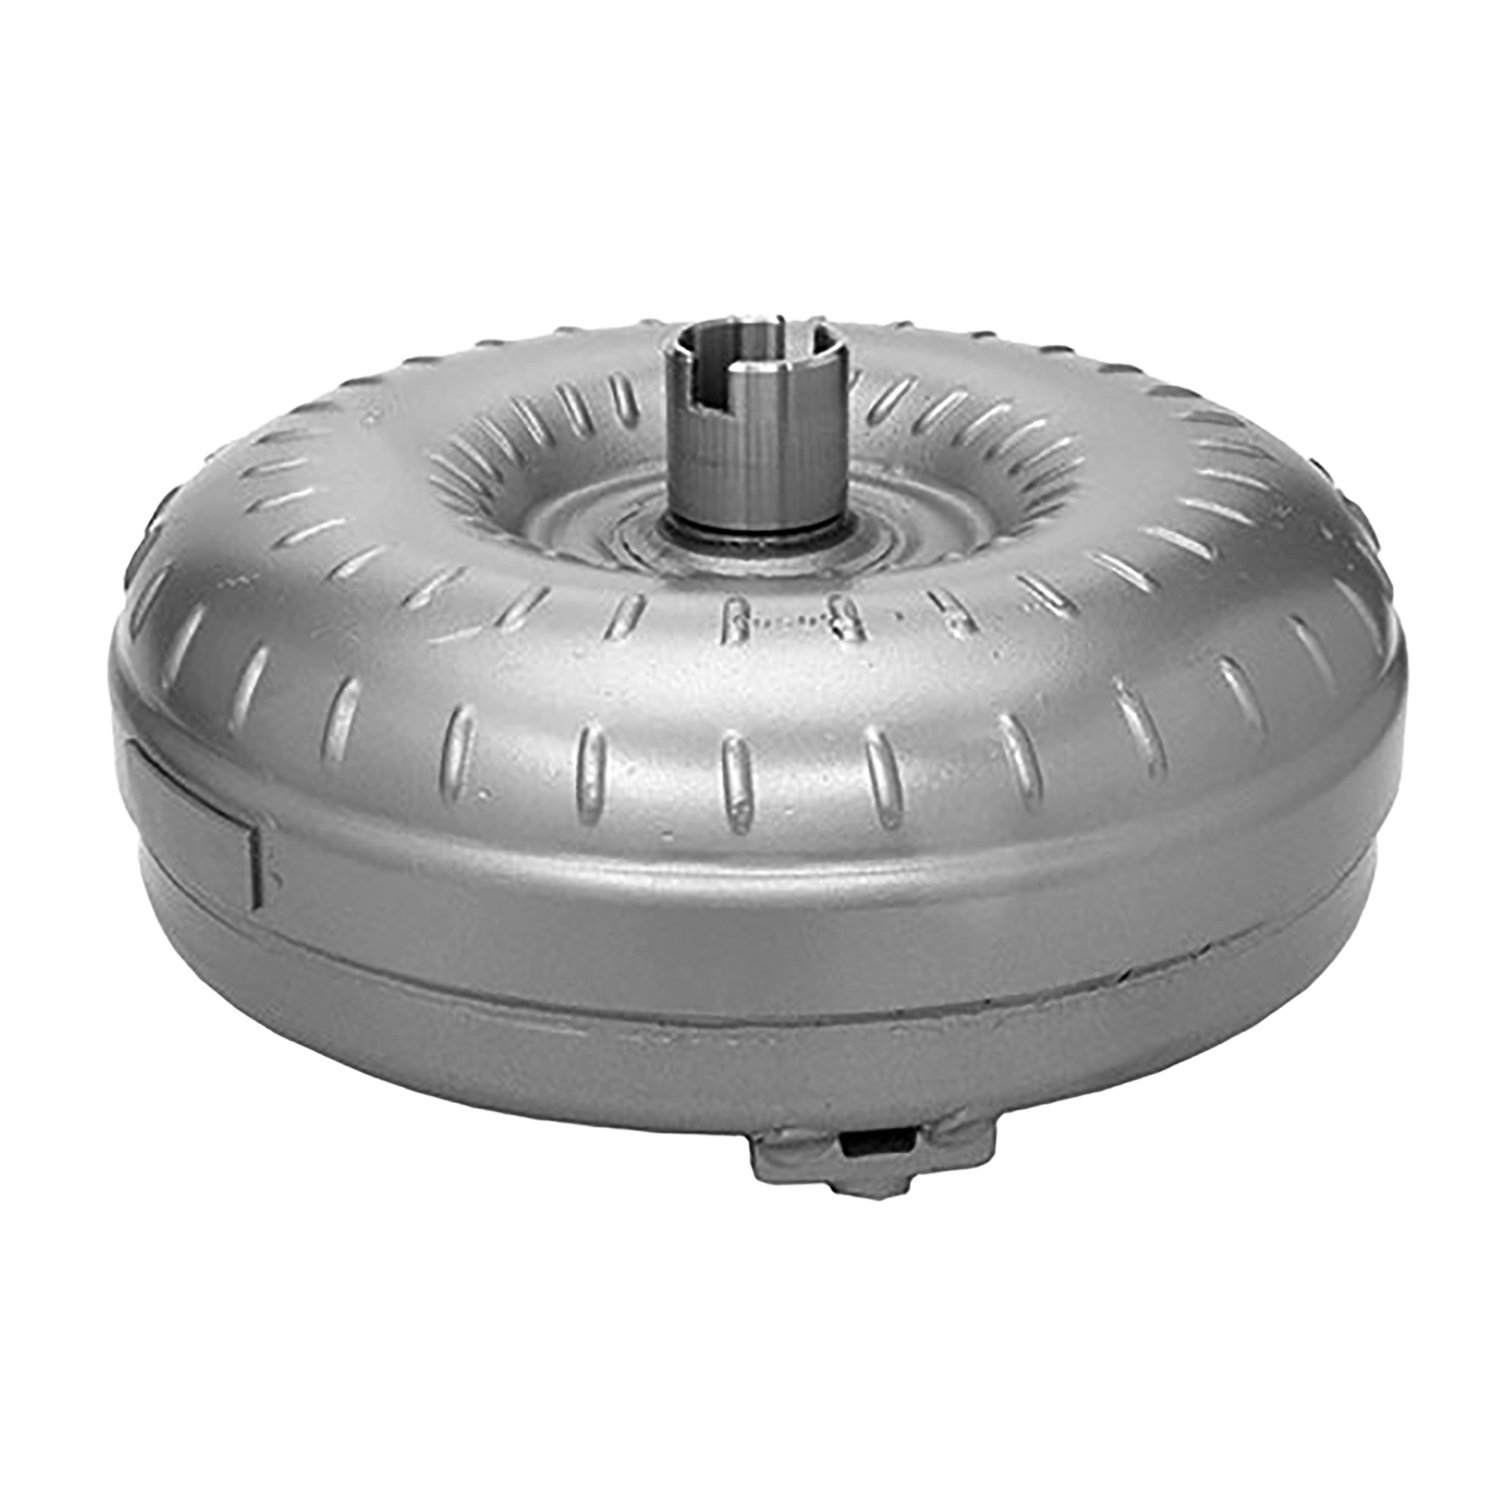 Remanufactured Automatic Transmission Torque Converter for GM TH700R4/4L60 87-95